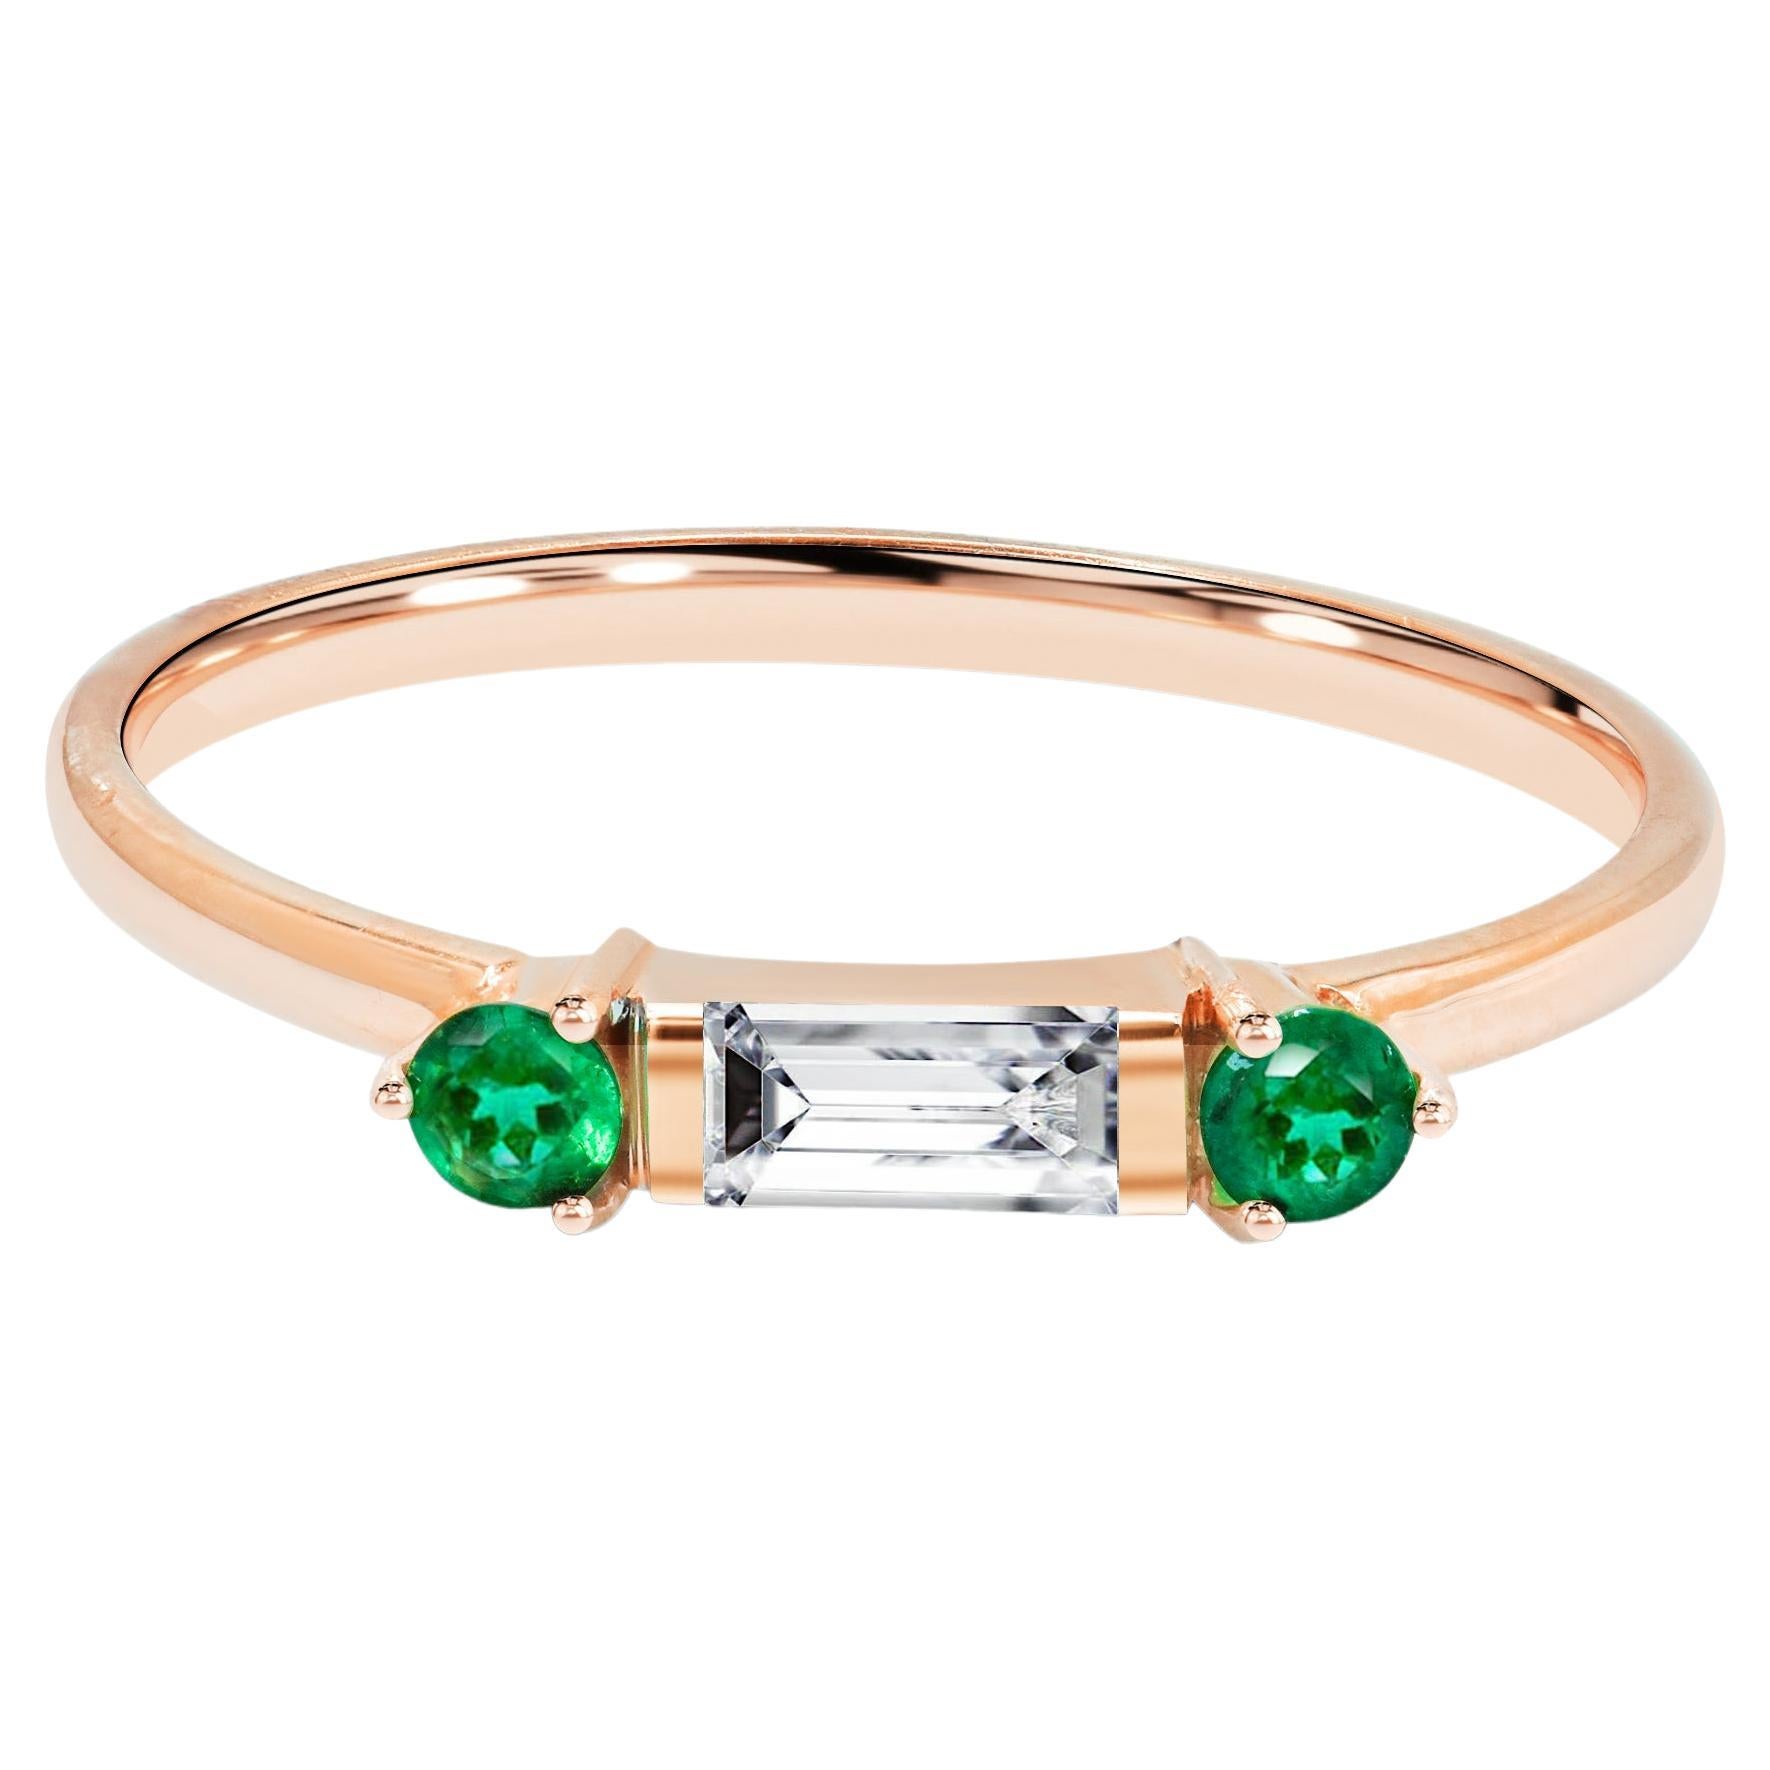 For Sale:  18k Gold Dainty Baguette Diamond Ring with Emerald Minimal Ring